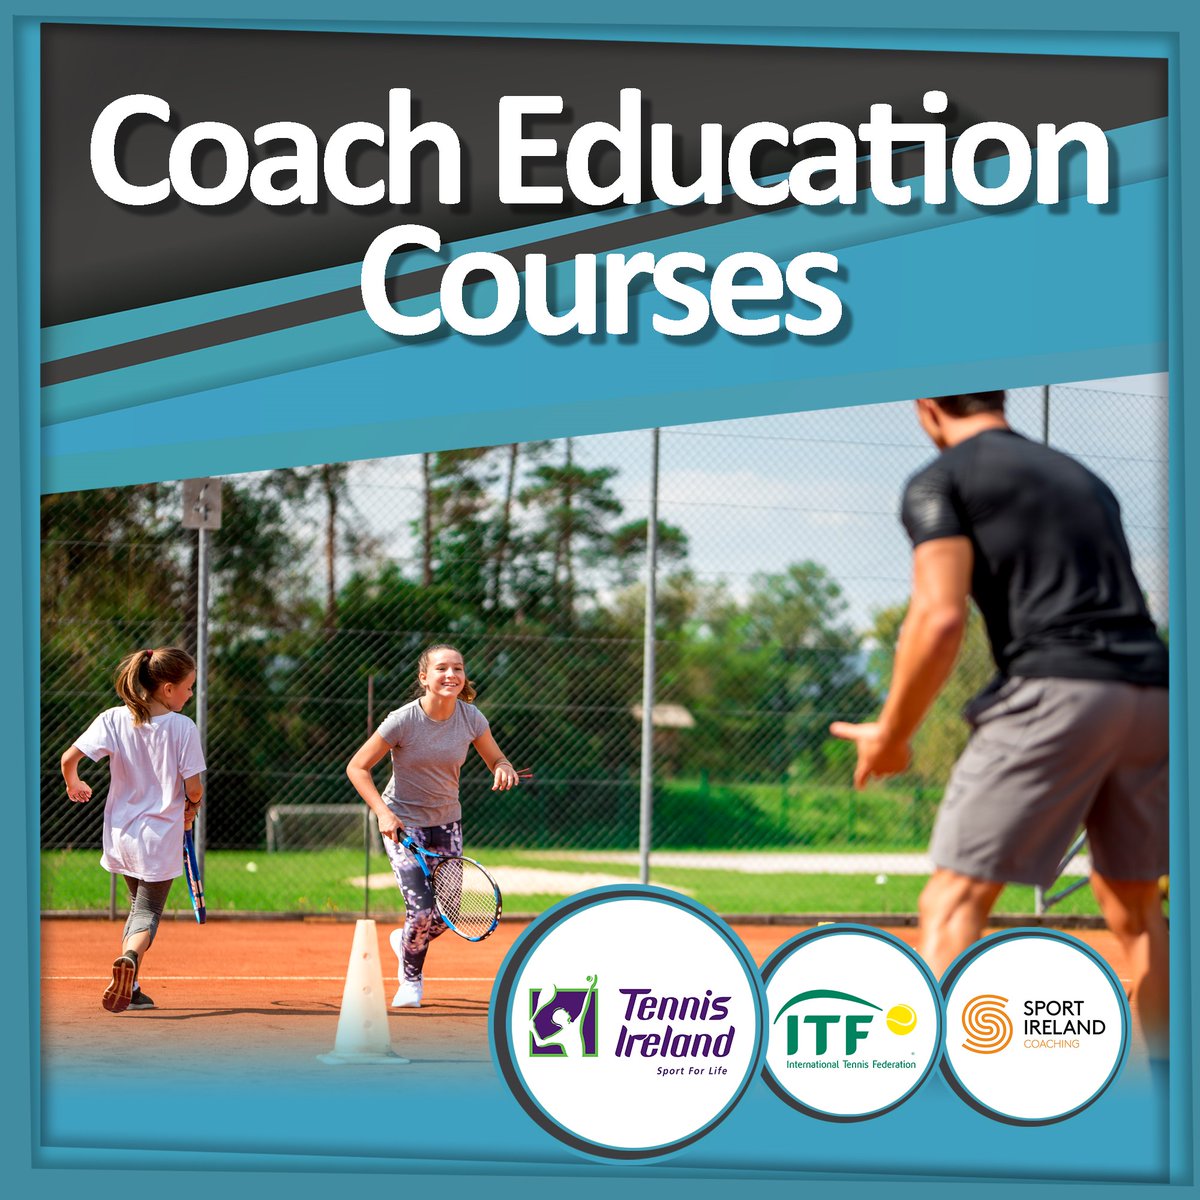 🎾Upcoming Level 1 courses Interested in becoming a tennis coach? Registration for the next Level 1 course in Dublin opens tomorrow at 10am! Find out more👇 tennisireland.ie/coach/level-1-… @Leinster_Tennis #LevelUp